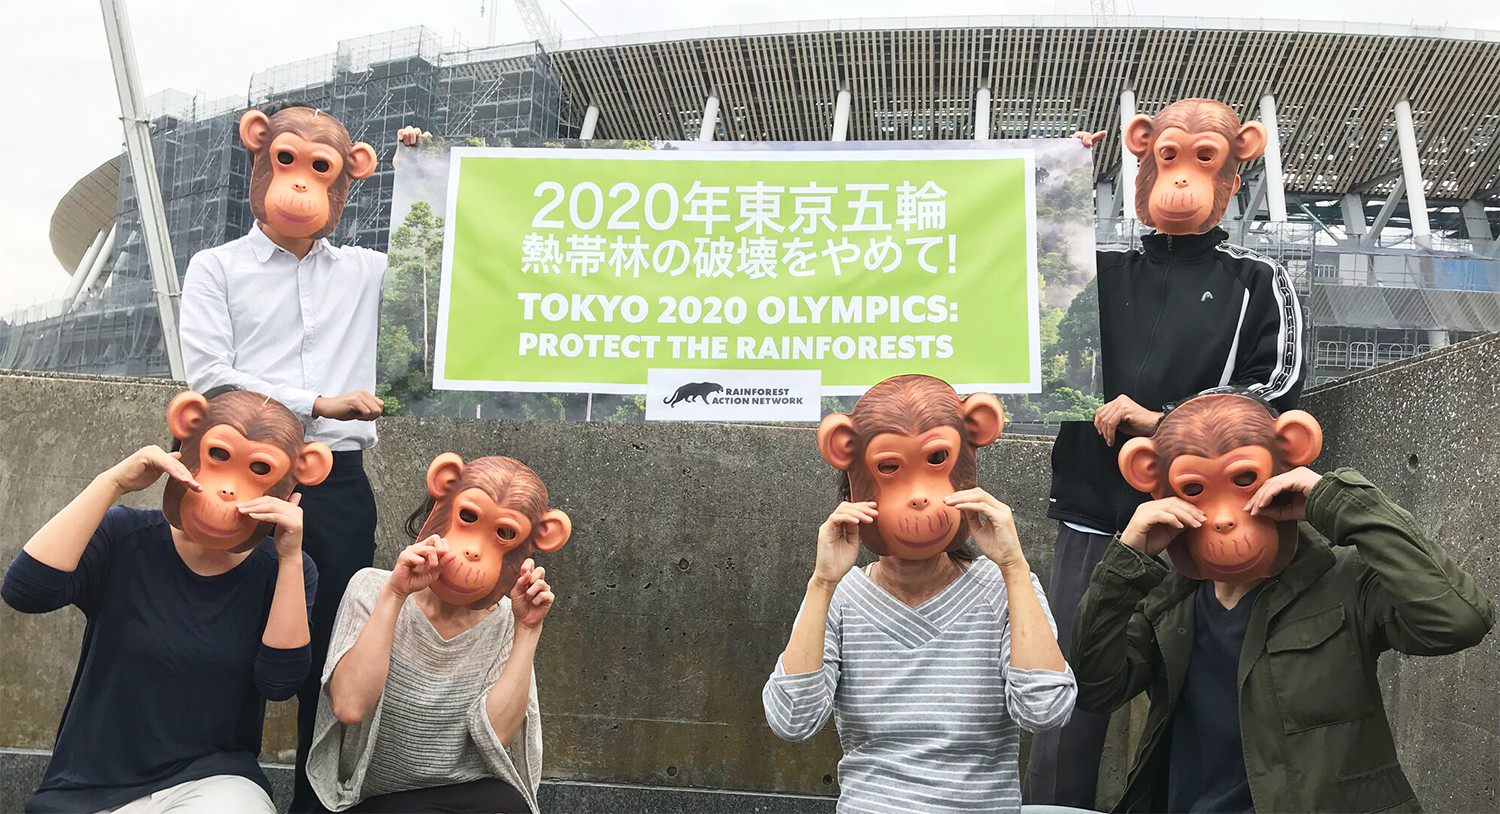 The Rainforest Action Network are among groups to have criticised Tokyo 2020 for allegedly using timber to help build facilities associated with rainforest destruction and human rights abuses ©Rainforest Action Network 